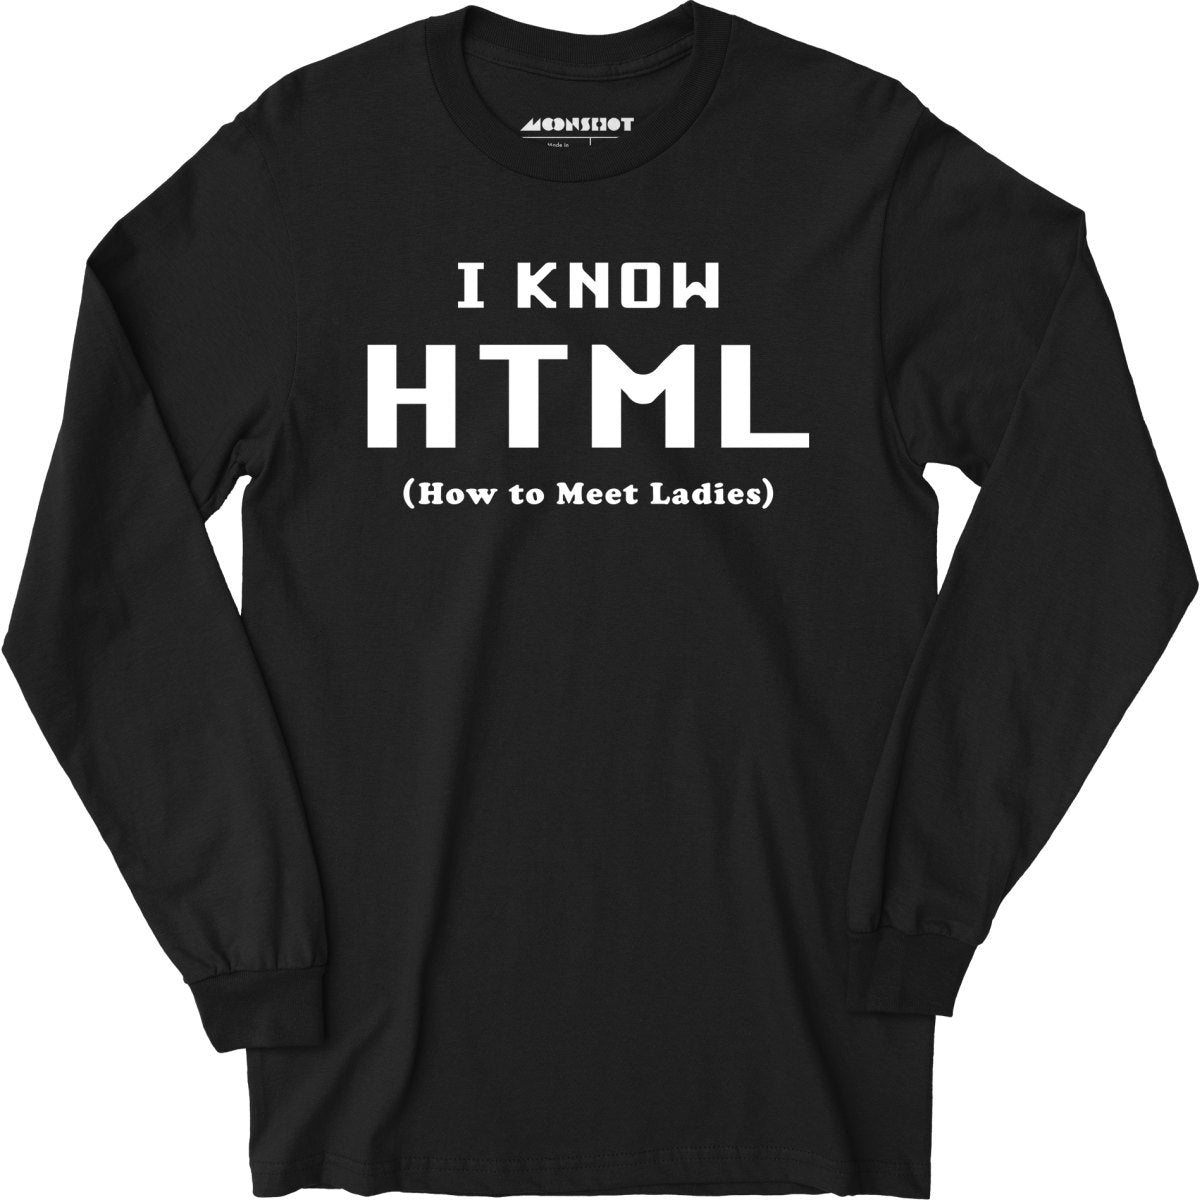 I Know HTML - How to Meet Ladies - Long Sleeve T-Shirt